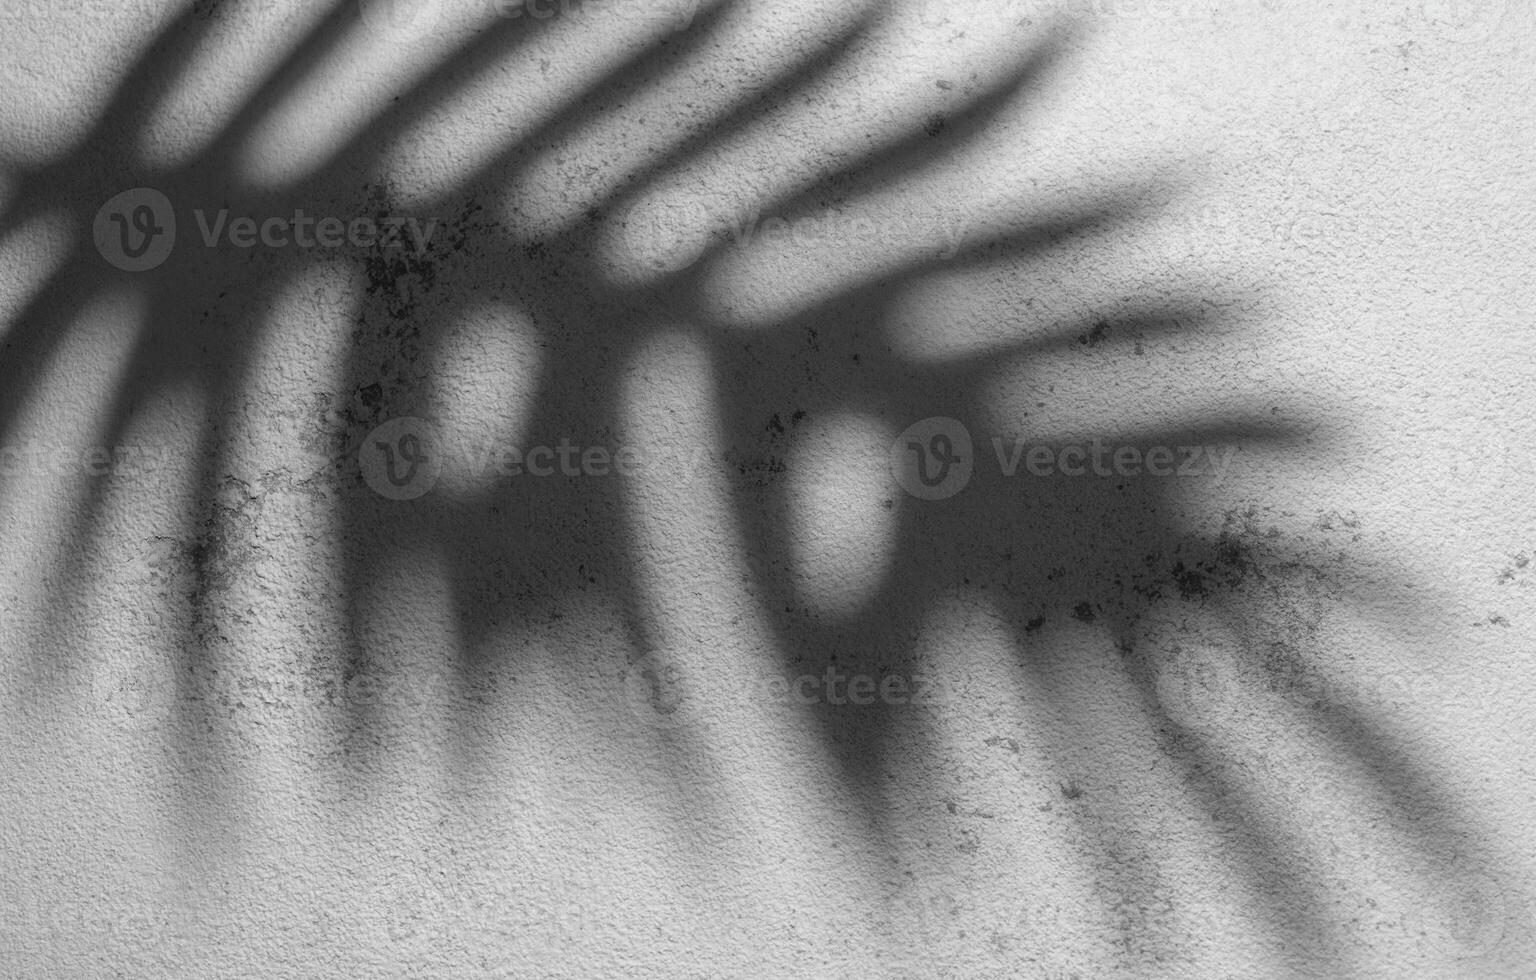 Shadow of a Fern Leaf Cast on a Textured White Wall During Daylight photo